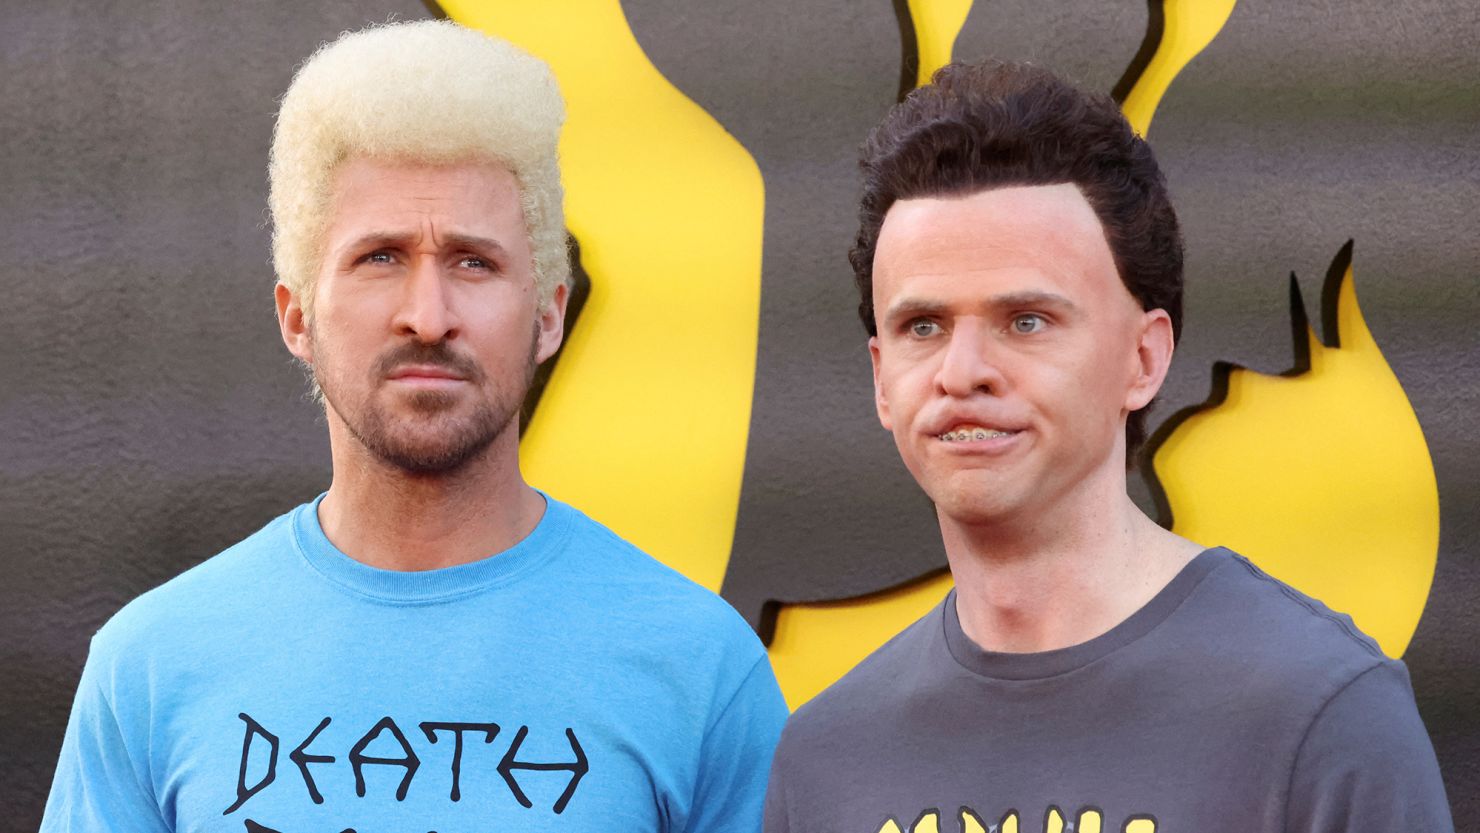 Ryan Gosling and Mikey Day, dressed as Beavis and Butt-Head from an SNL skit, attend a premiere for the film "The Fall Guy" on Tuesday.